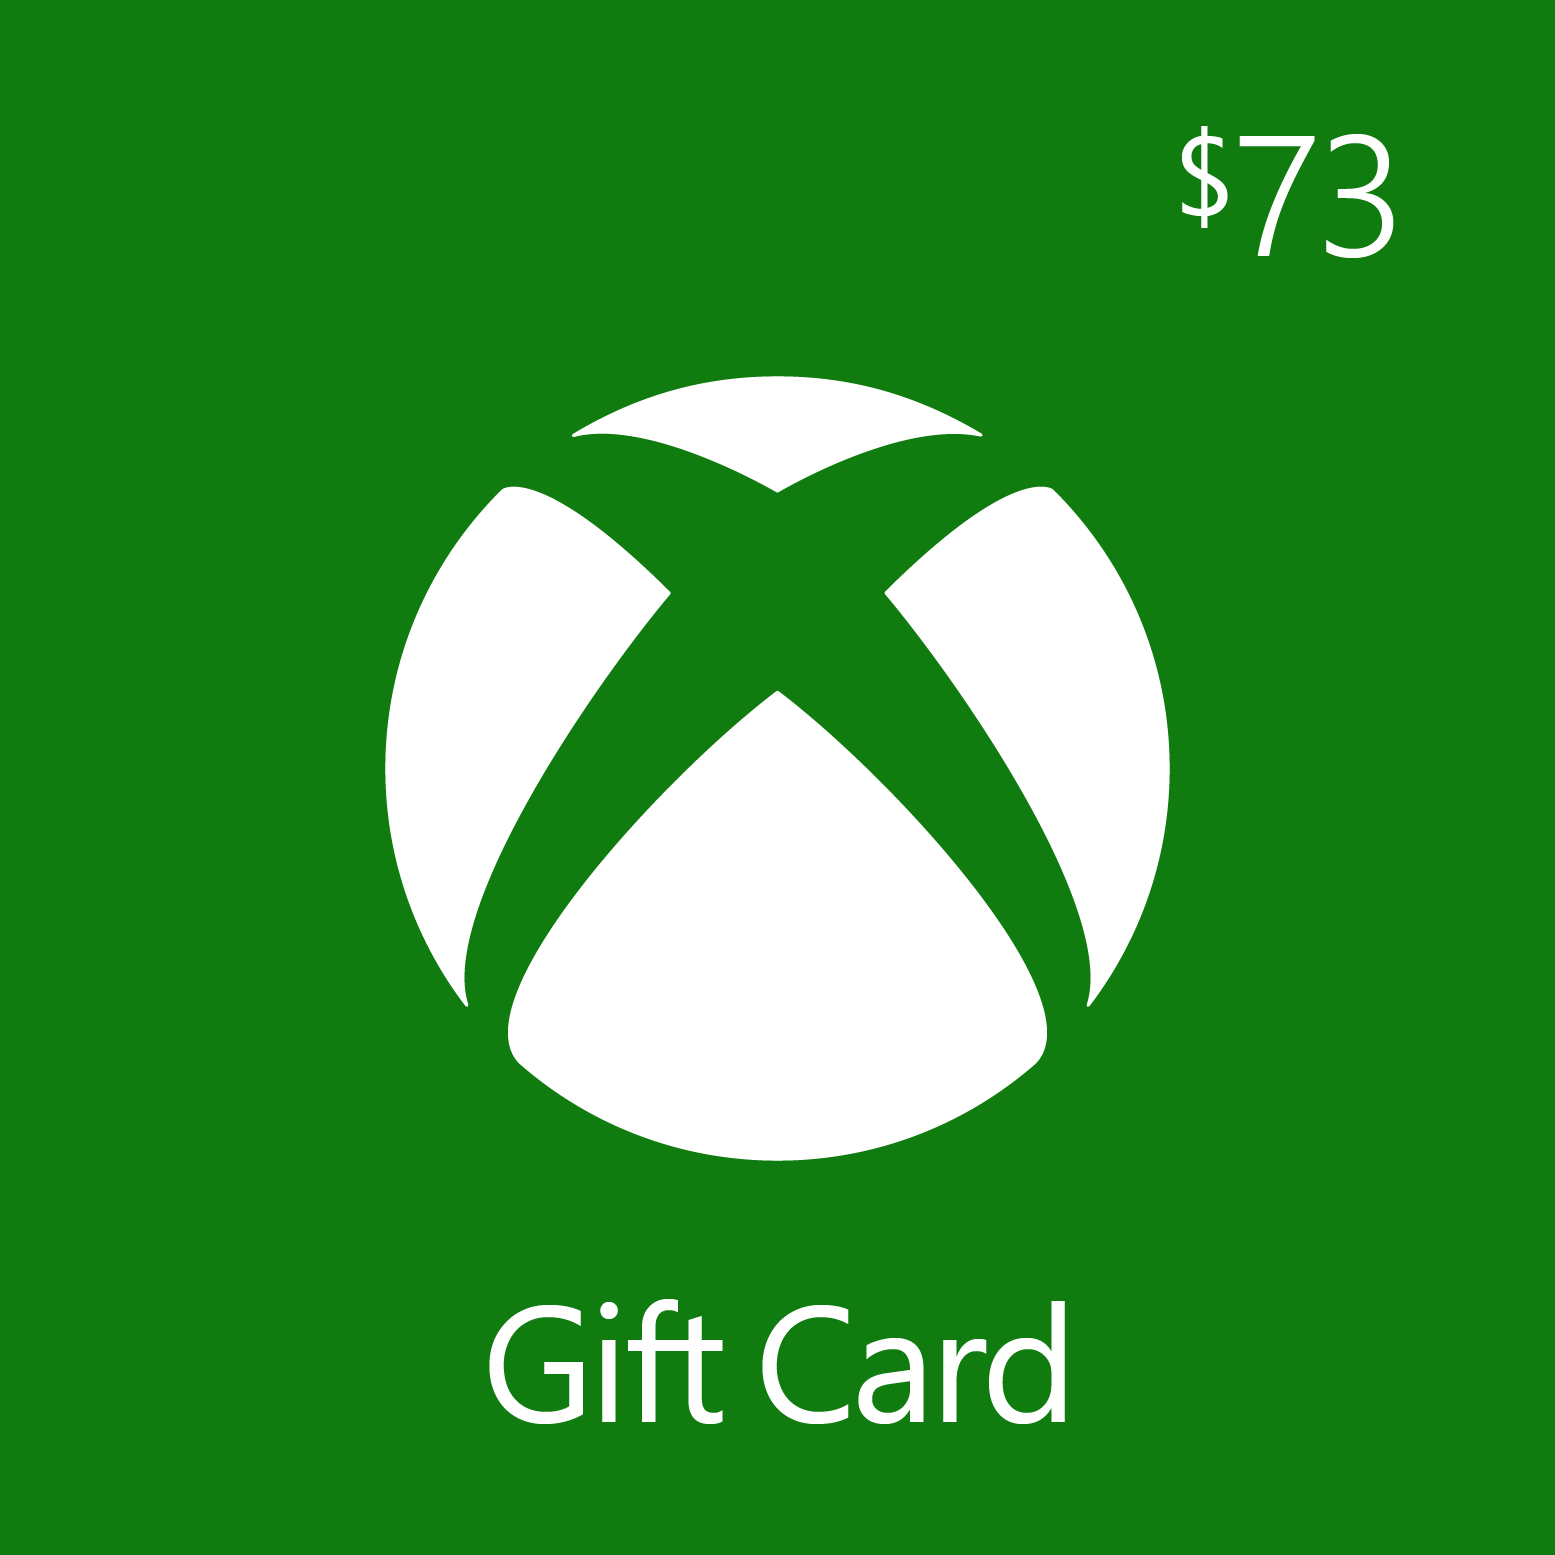 can i use xbox gift card to buy xbox game pass